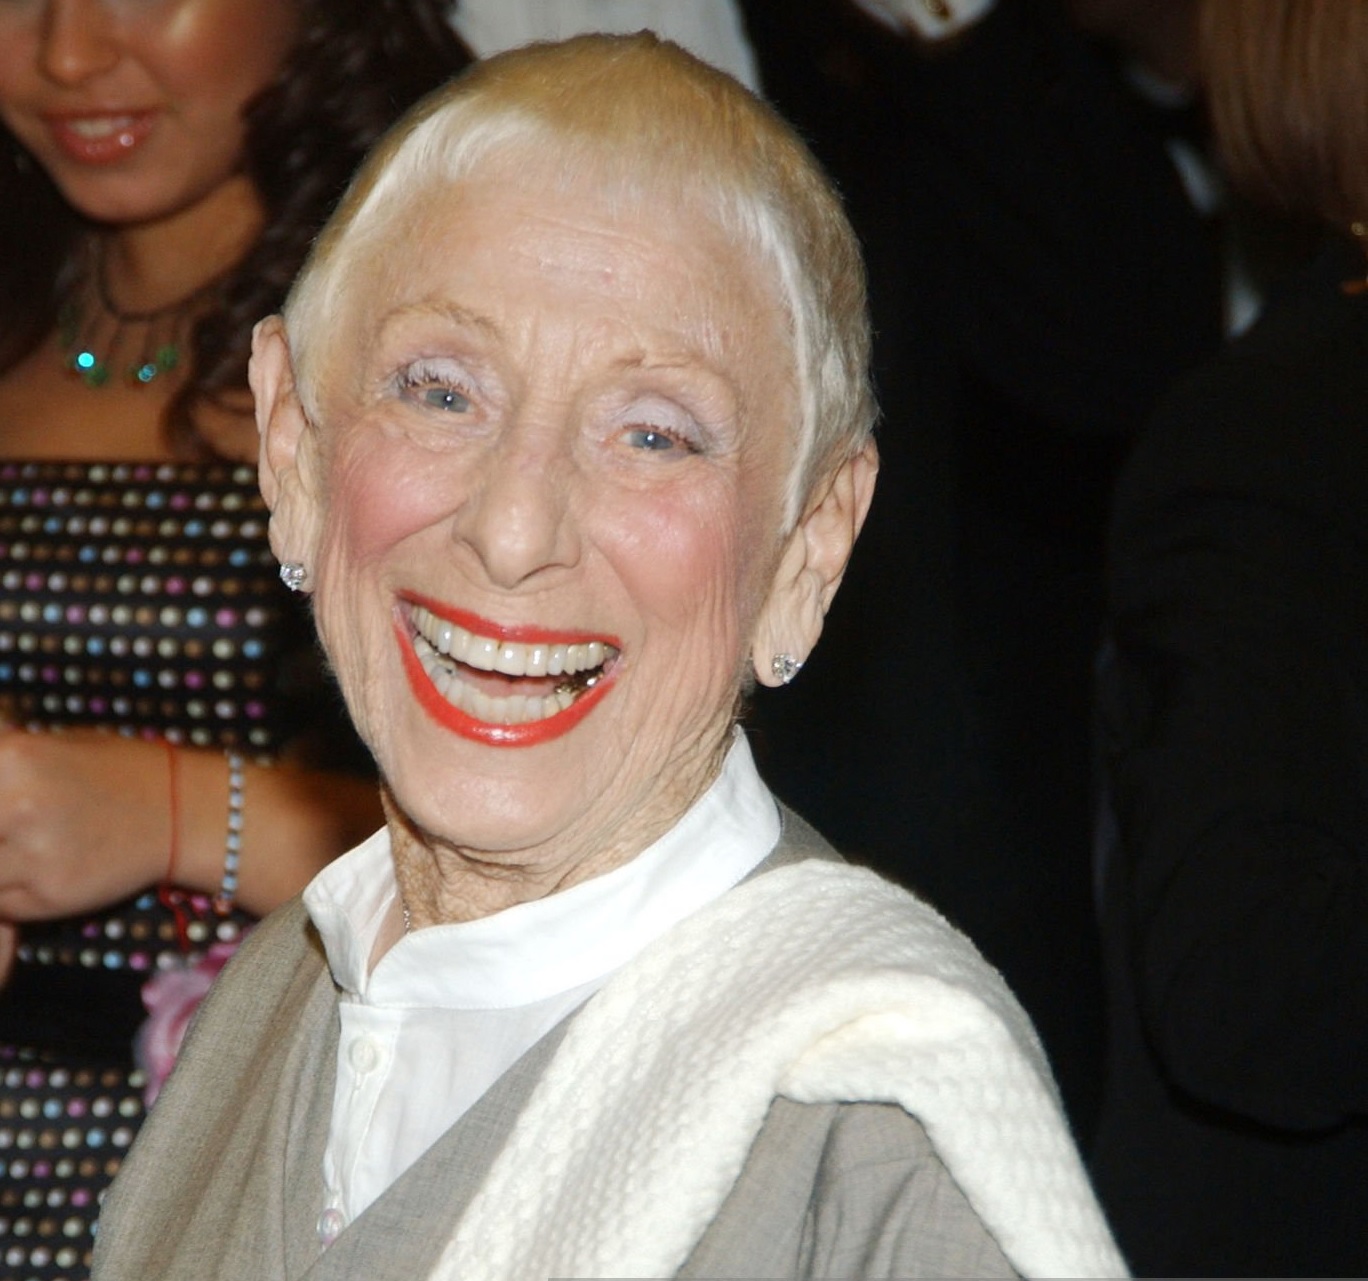 Leah Adler, attended the Children At Heart Gala To Benefit Children Of Chornobyl on November 2004